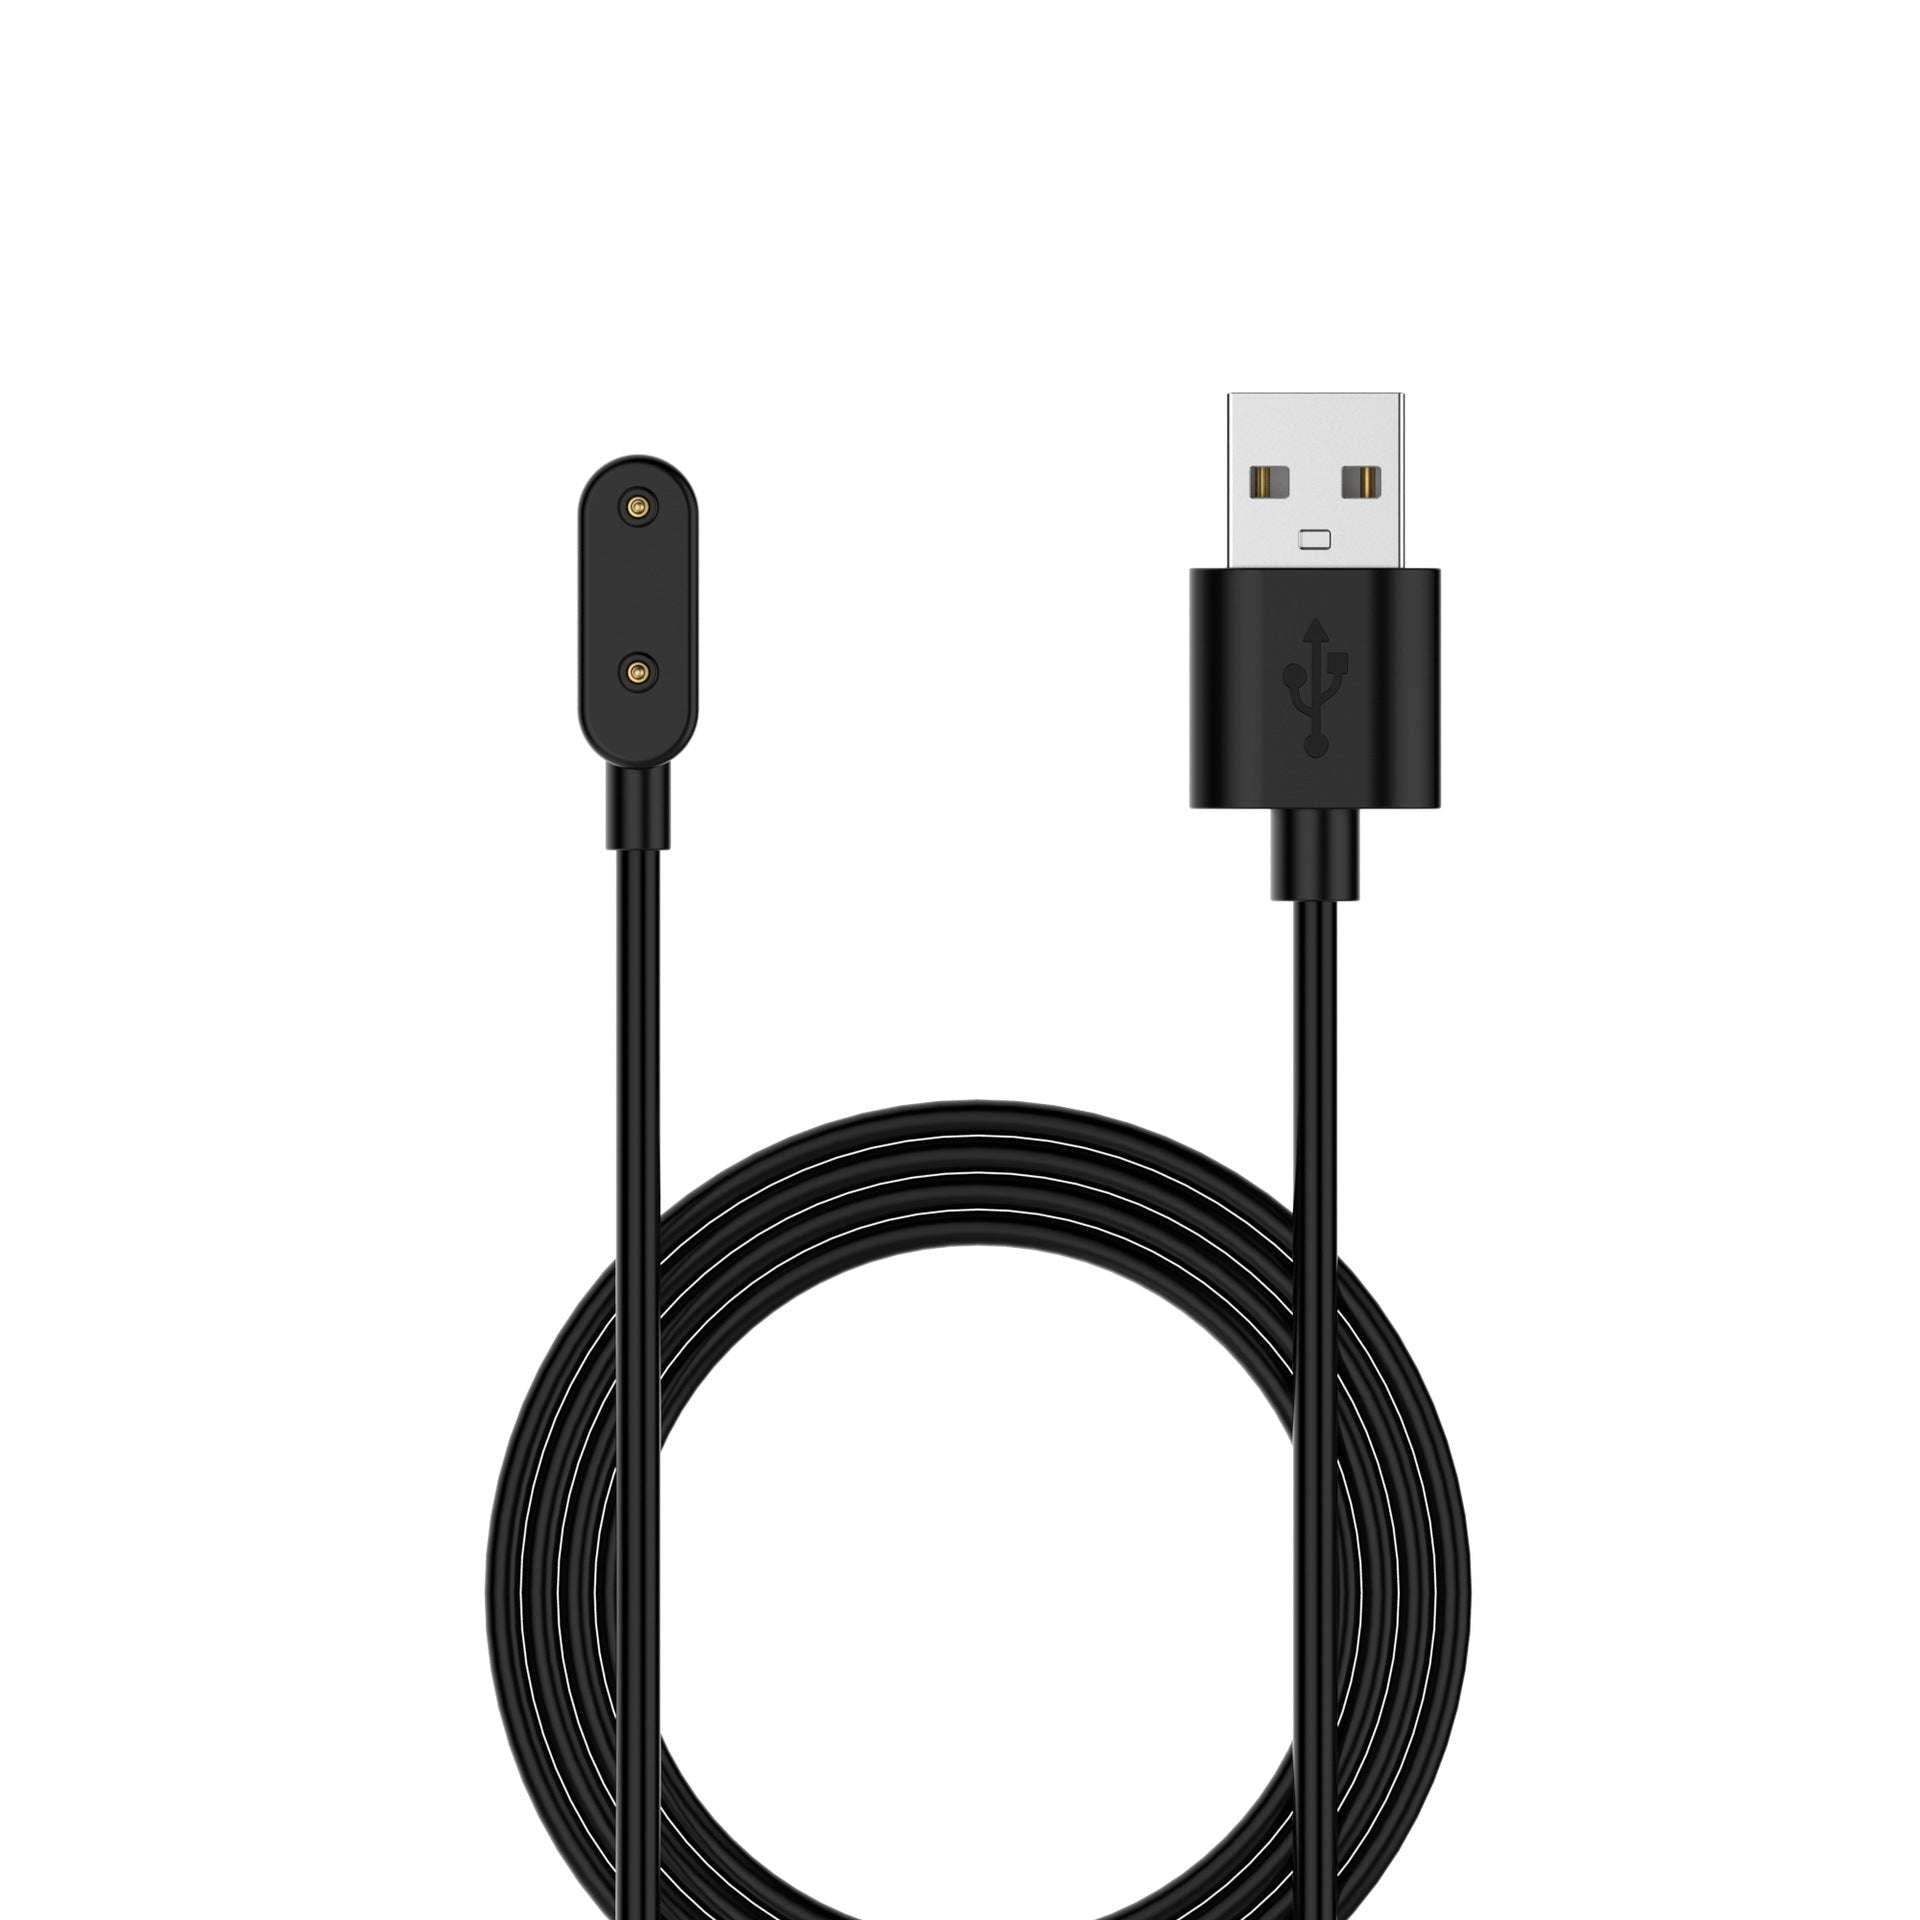 Honor Watch ES charger, Huawei Watch Fit charger, magnetic charging cable holder - available at Sparq Mart